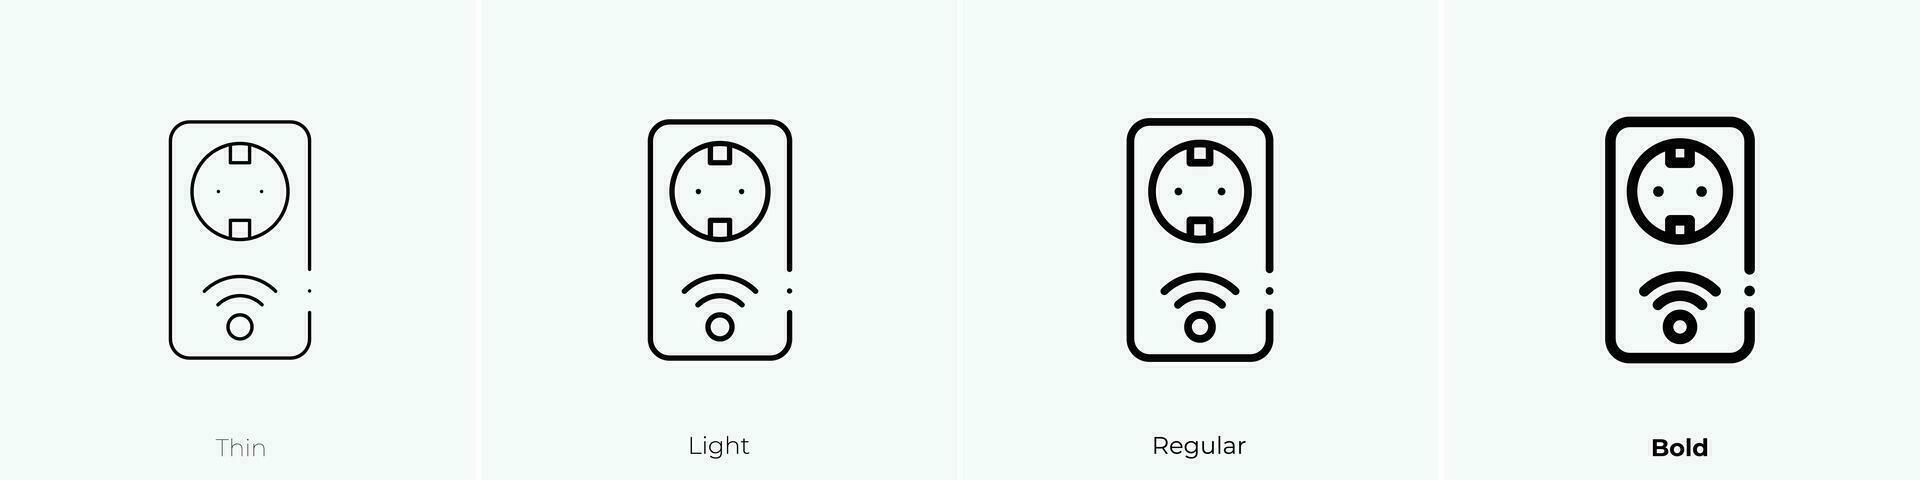 smart icon. Thin, Light, Regular And Bold style design isolated on white background vector